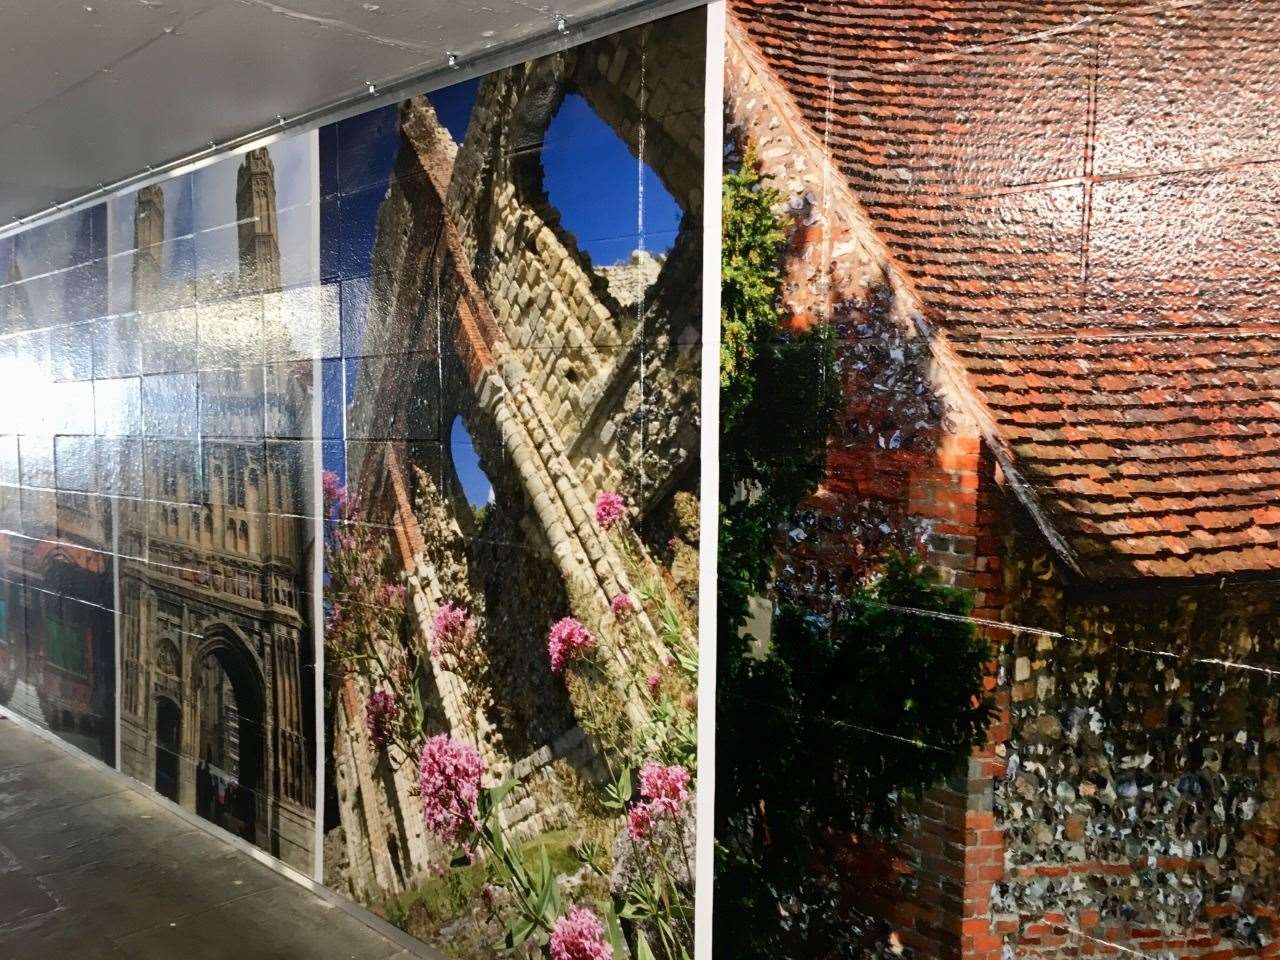 The Rheims Way underpass mural, featuring the Cathedral (16208651)